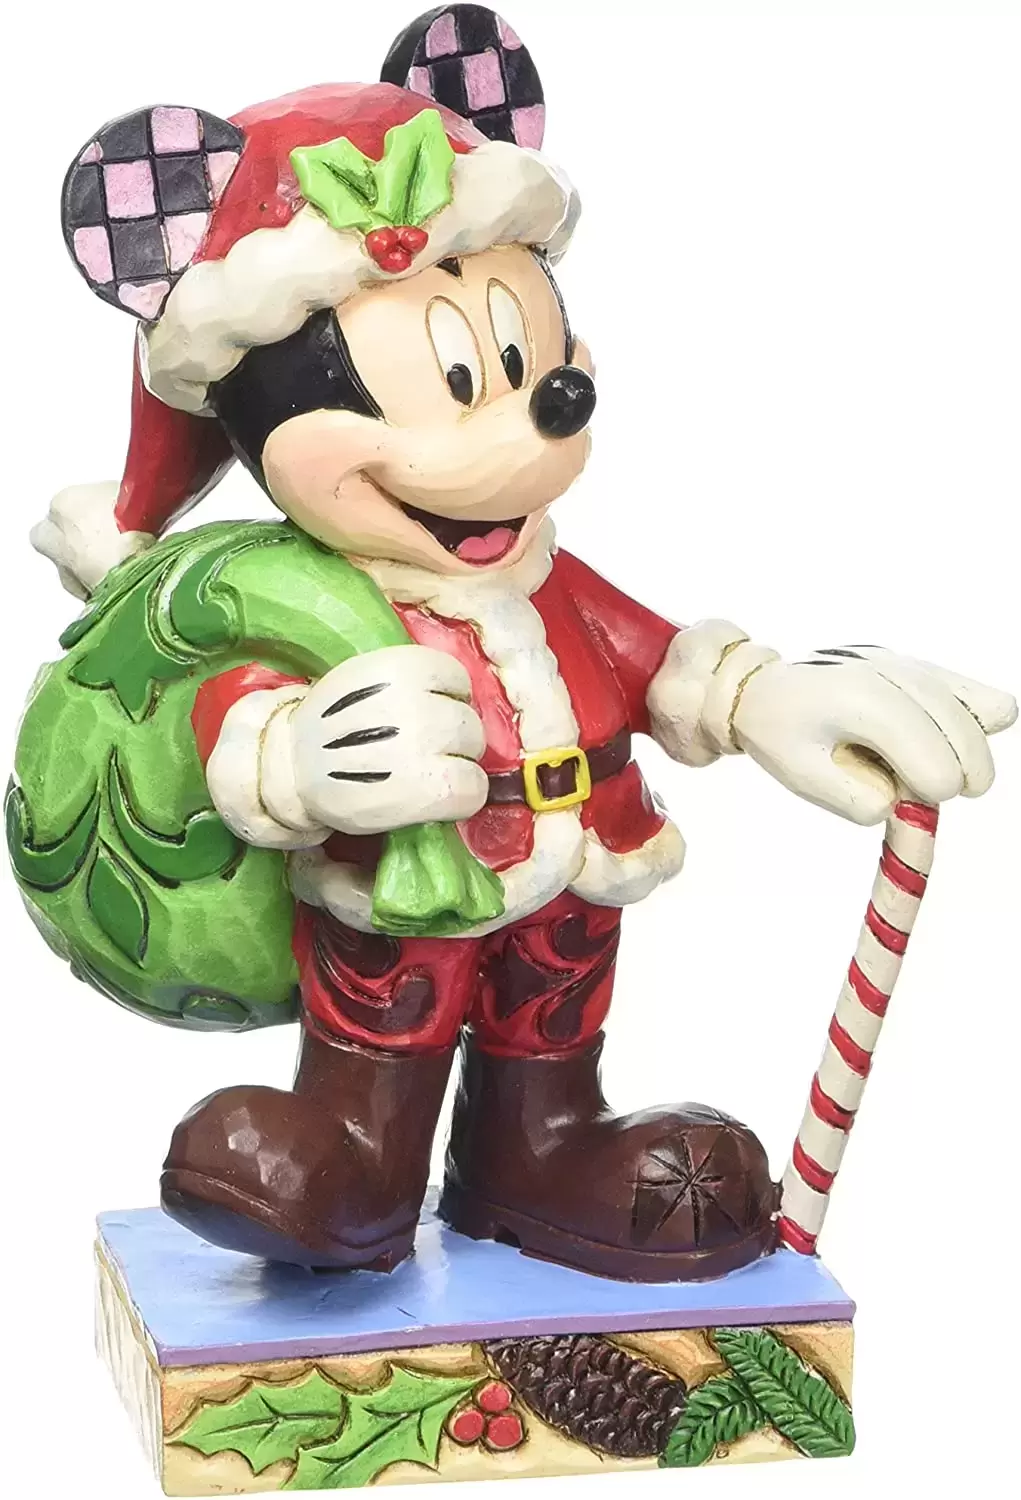 Disney Traditions by Jim Shore - Holiday Cheer For All